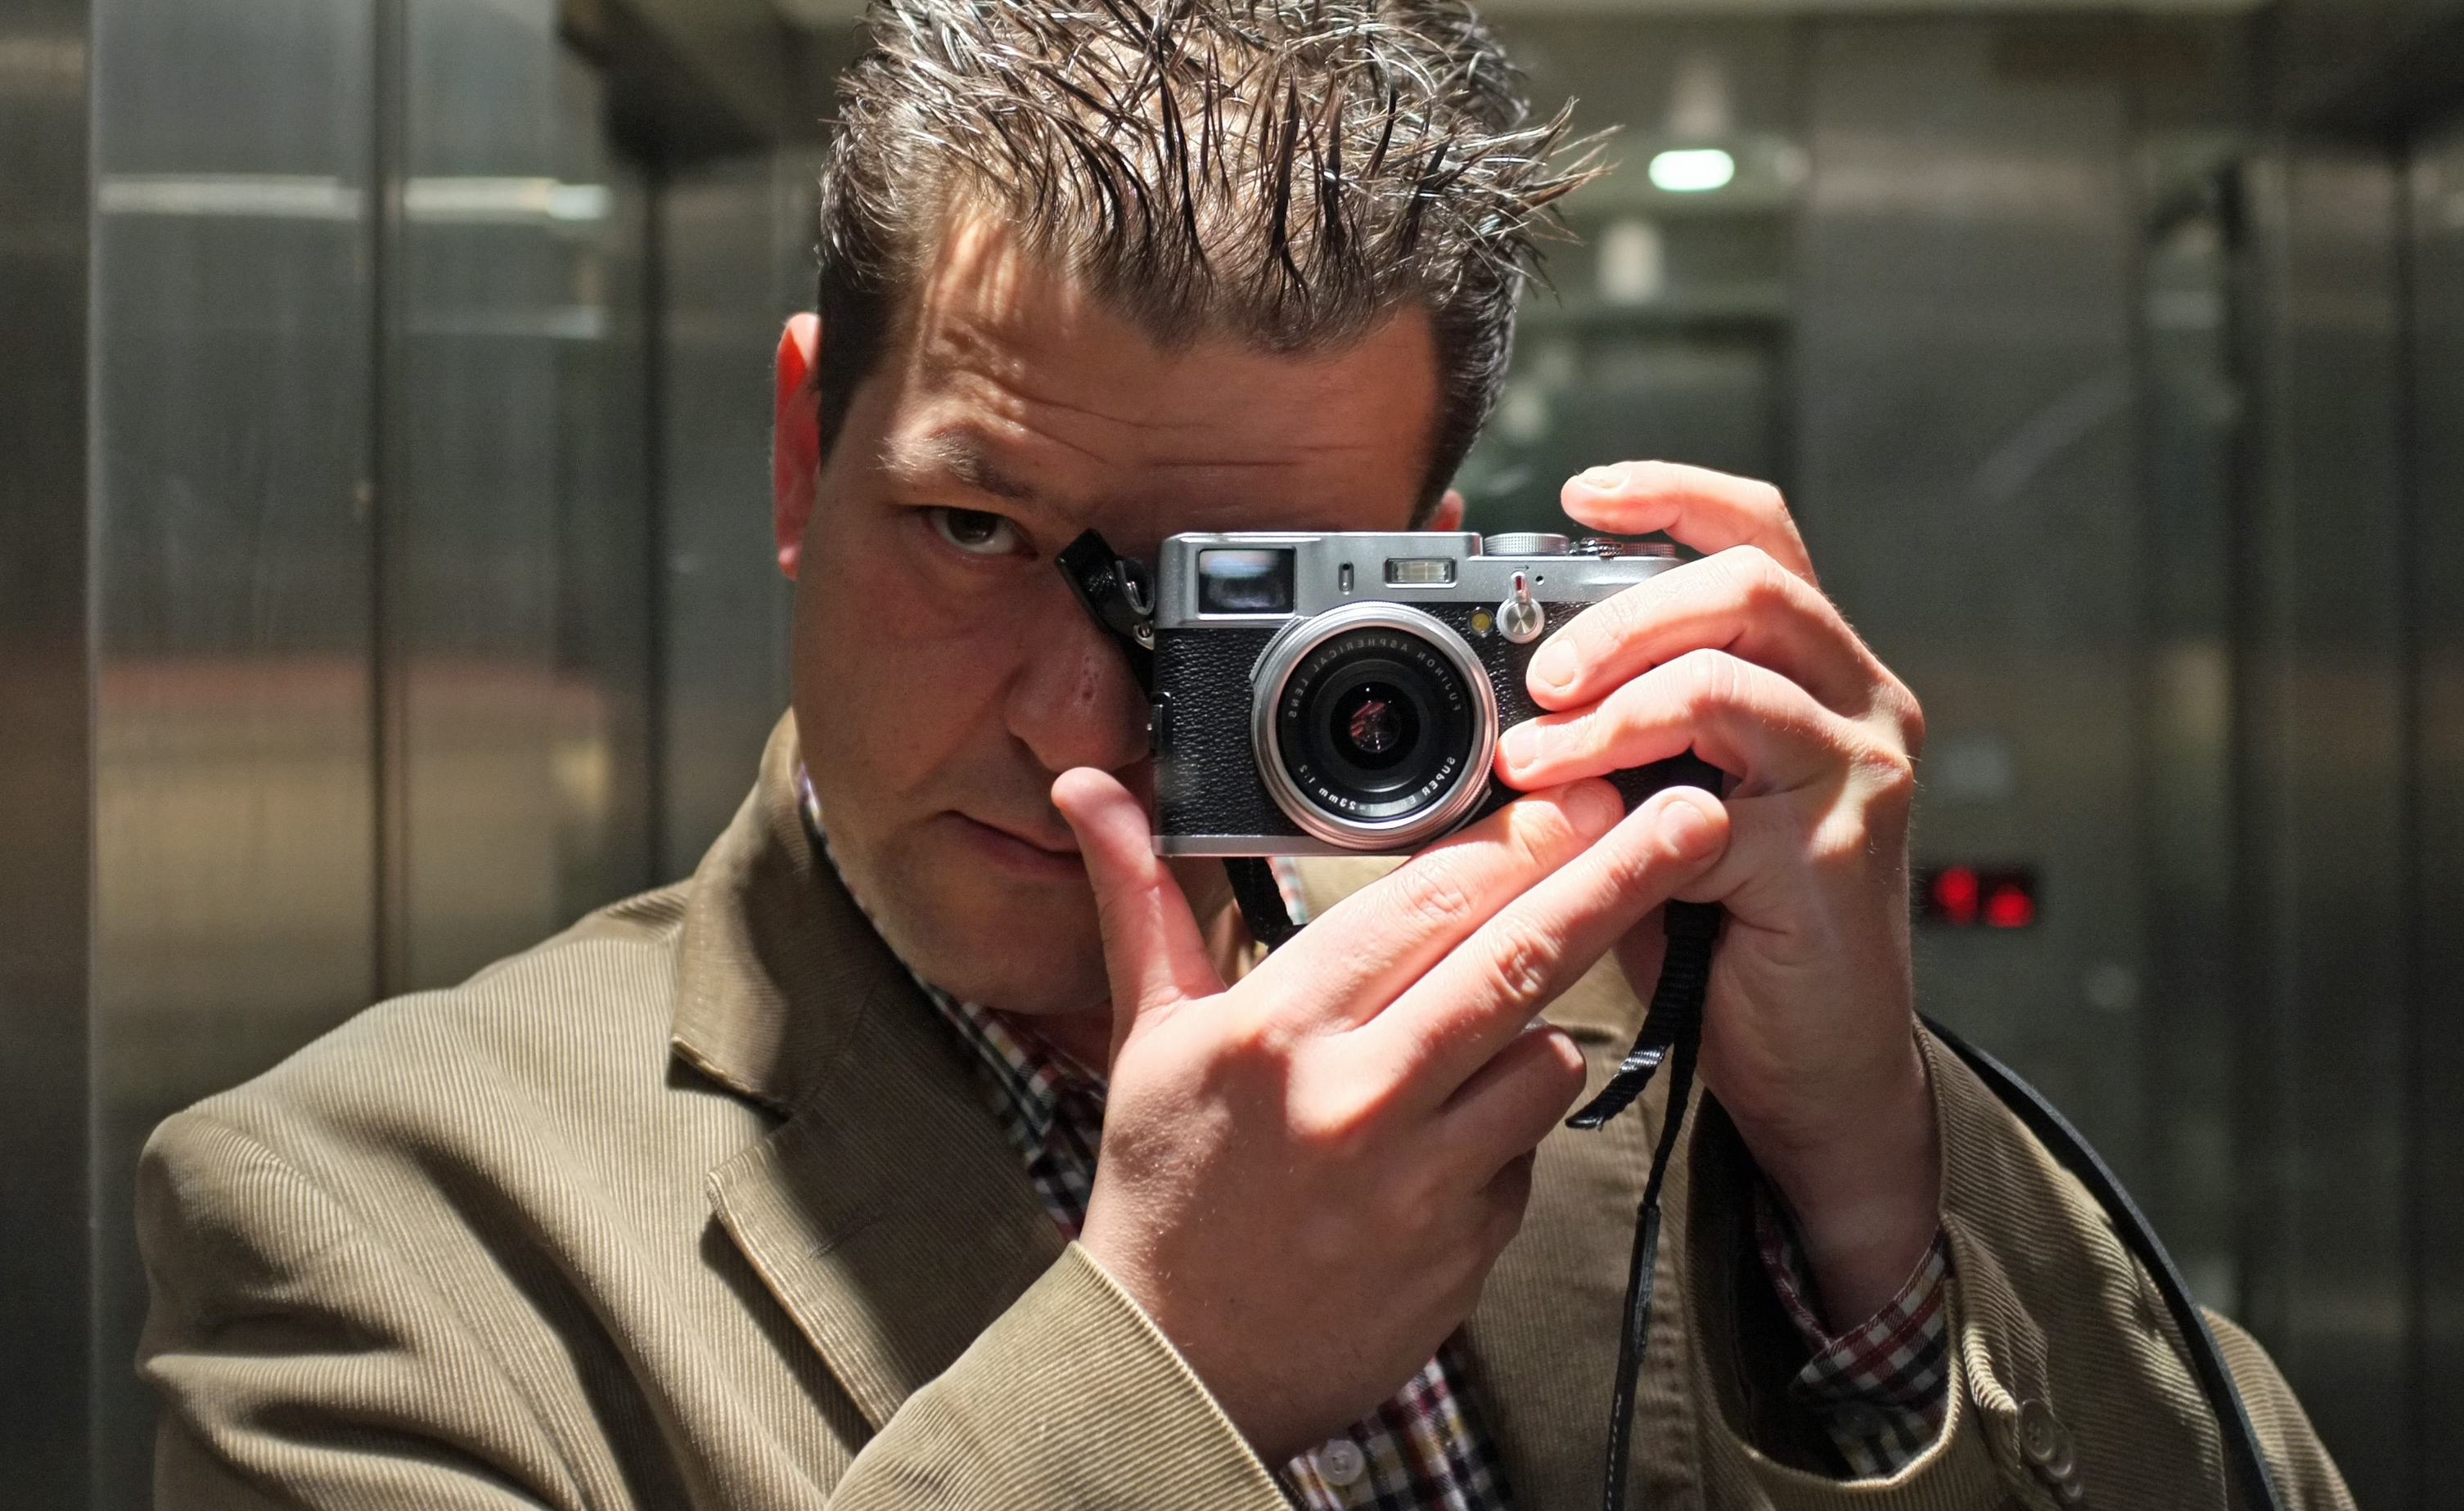 Fuji Finepix X100 Review | A day in the life of…